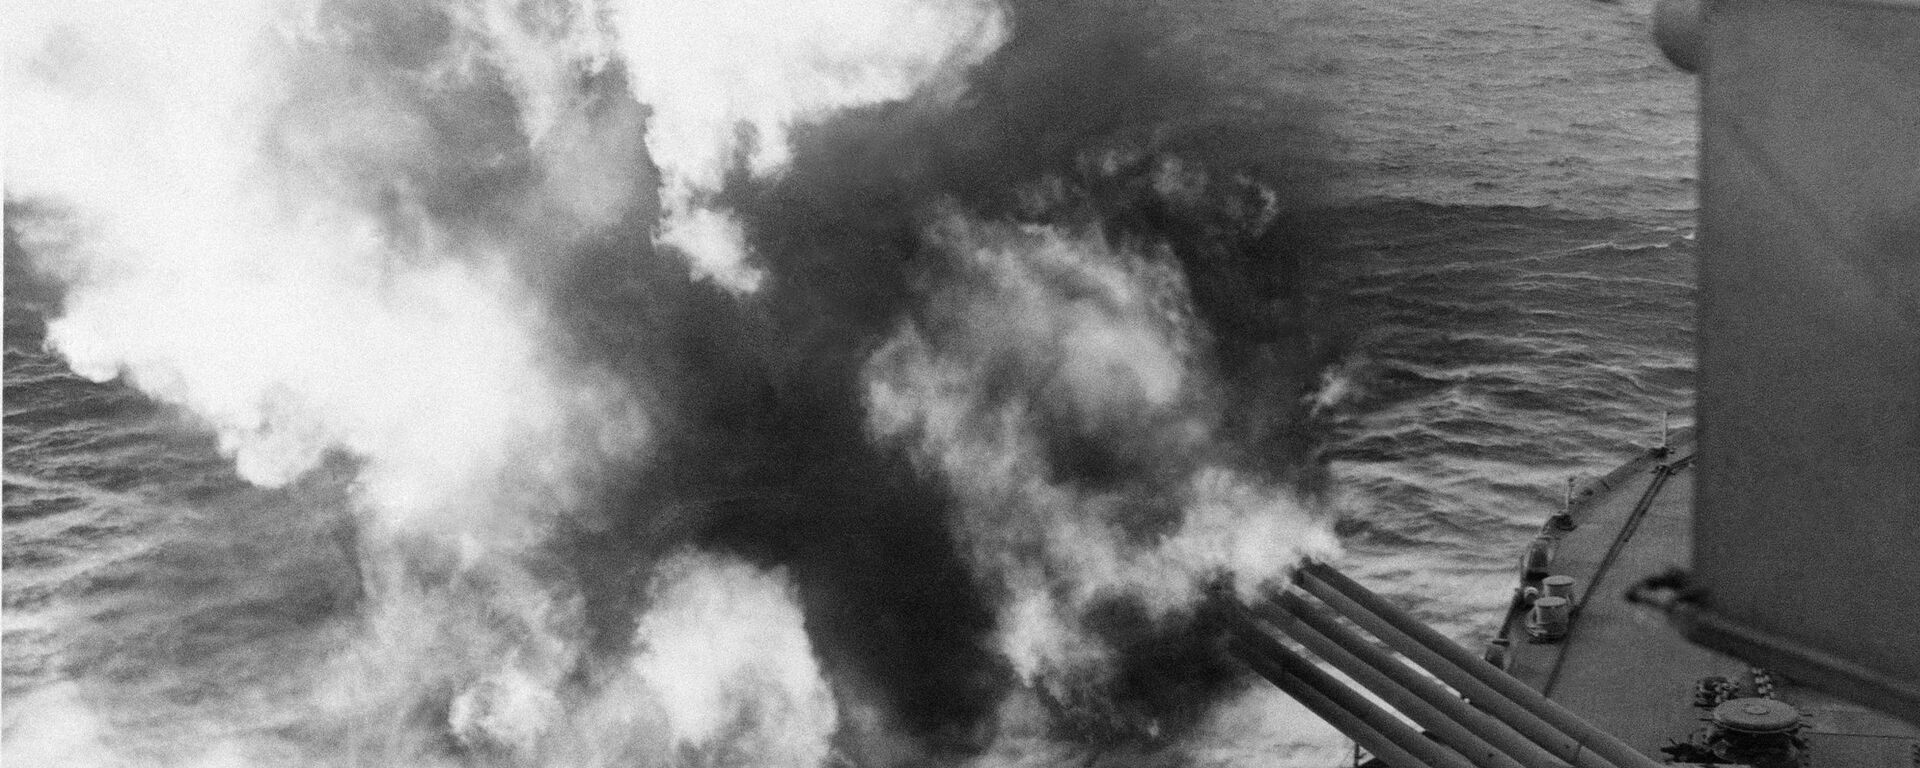 Mushrooms of smoke and flame billow out from the giant USS Nevada as the battleship provides artillery support for Allied ground forces in France by hammering enemy installations from her vantage point in the English Channel, June 6, 1944. - Sputnik International, 1920, 12.05.2020